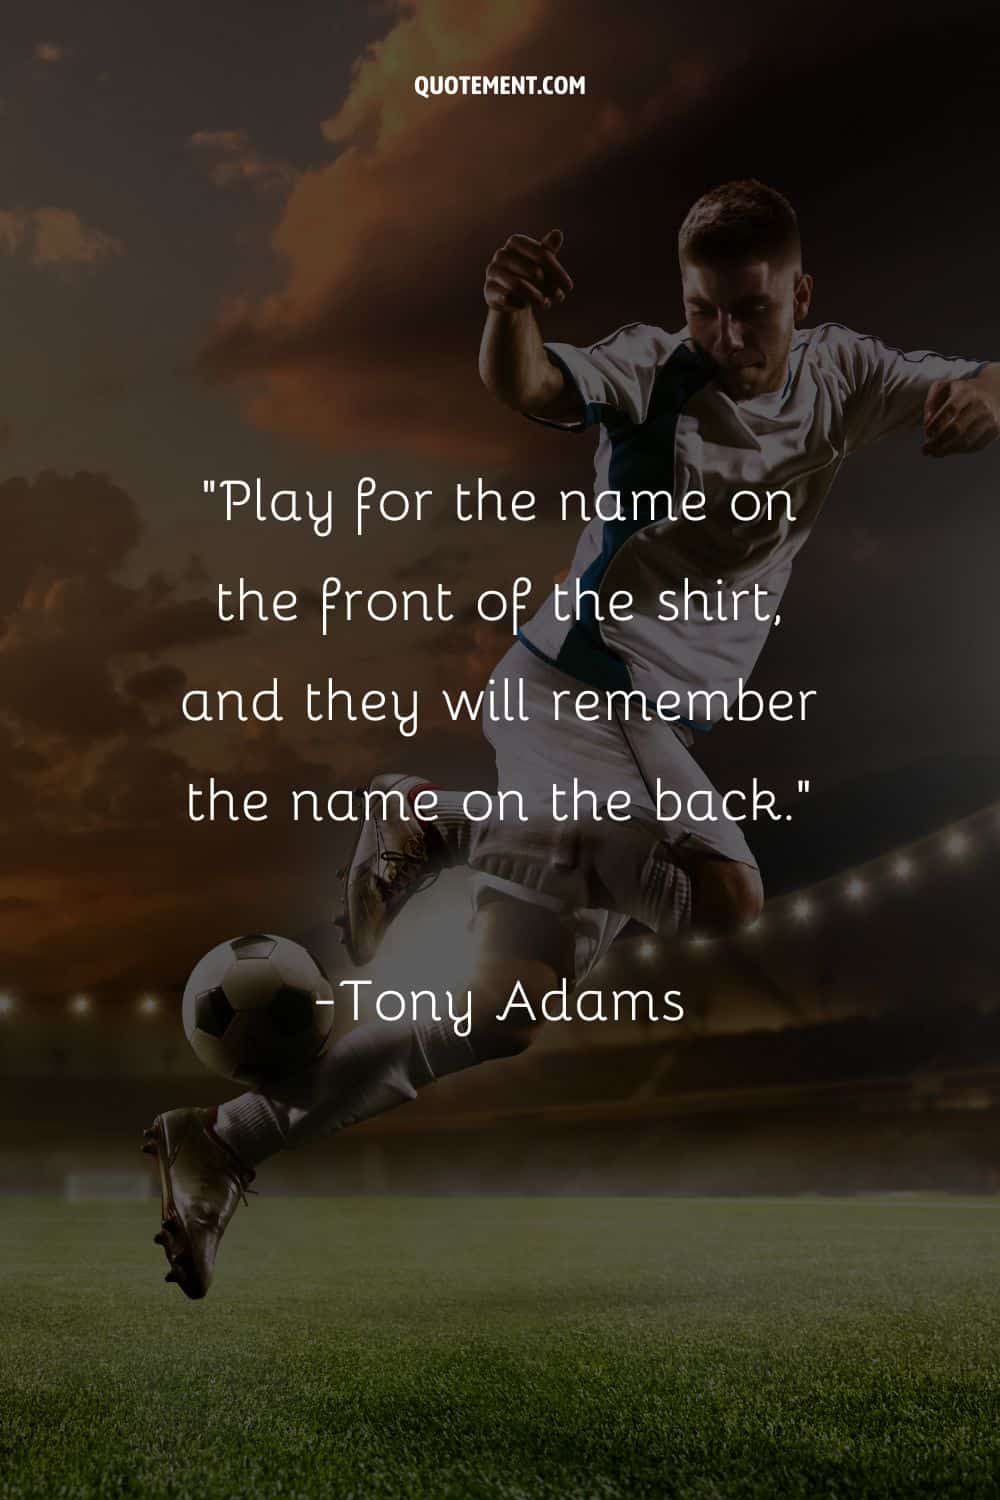 the spotlight following the player representing soccer quote famous